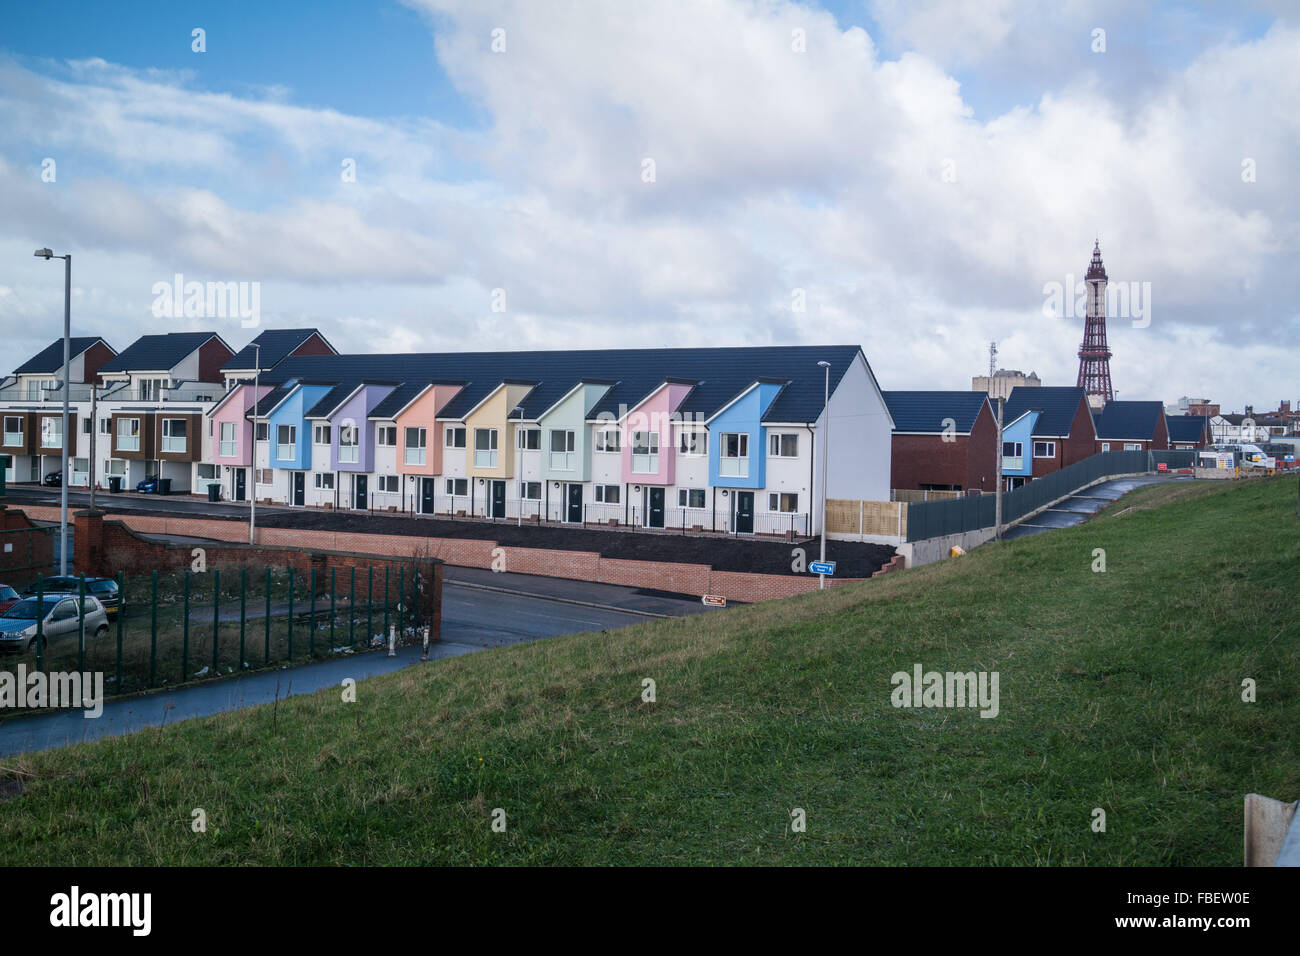 Hollinwood homes new housing scheme on Rigby rd Blackpool Stock Photo